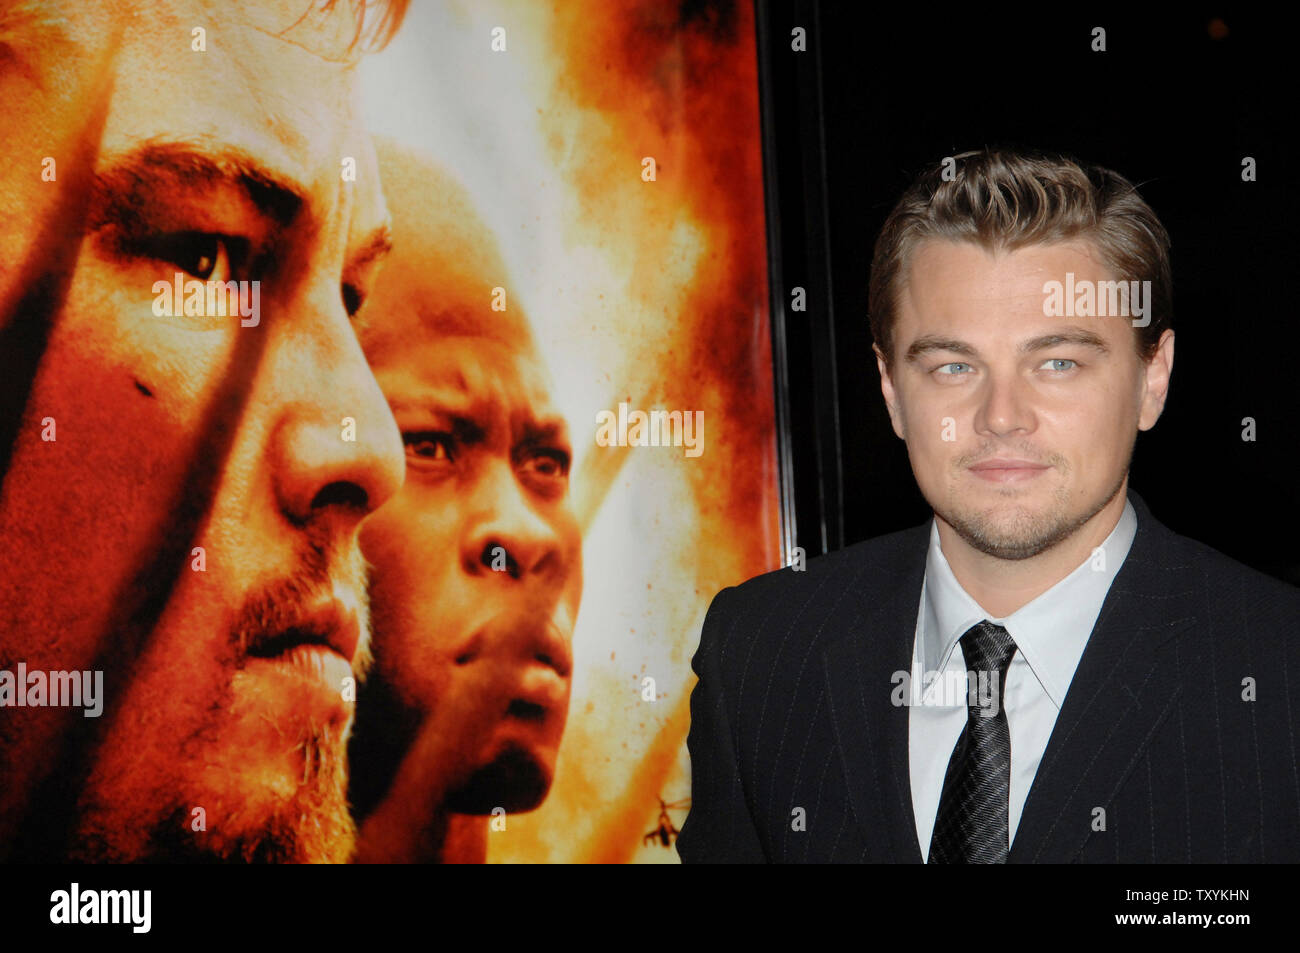 Actor Leonardo DiCaprio, star of the new motion picture drama 'Blood Diamond', stands next to his photograph on the film's poster as he arrives for the premiere of the film at Grauman's Chinese Theatre in the Hollywood section of Los Angeles on December 6, 2006. The film, set in Sierra Leone is about a quest to recover a rare diamond. (UPI Photo/Jim Ruymen) Stock Photo